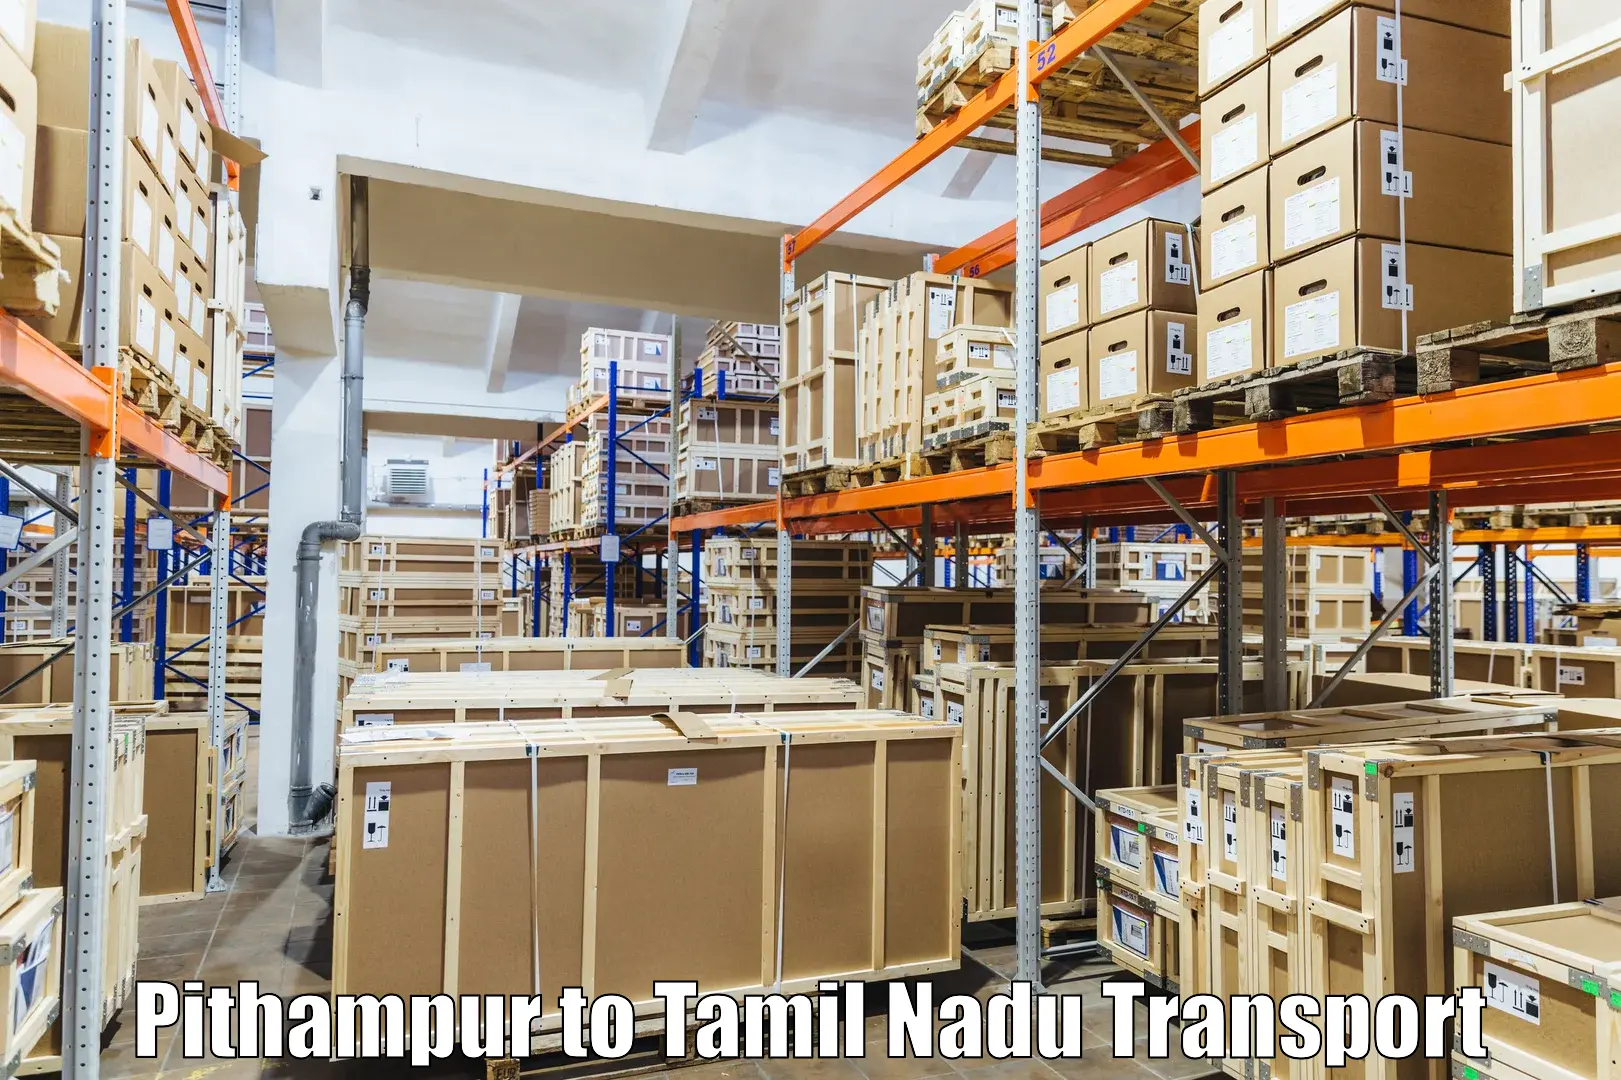 Express transport services Pithampur to Tamil Nadu